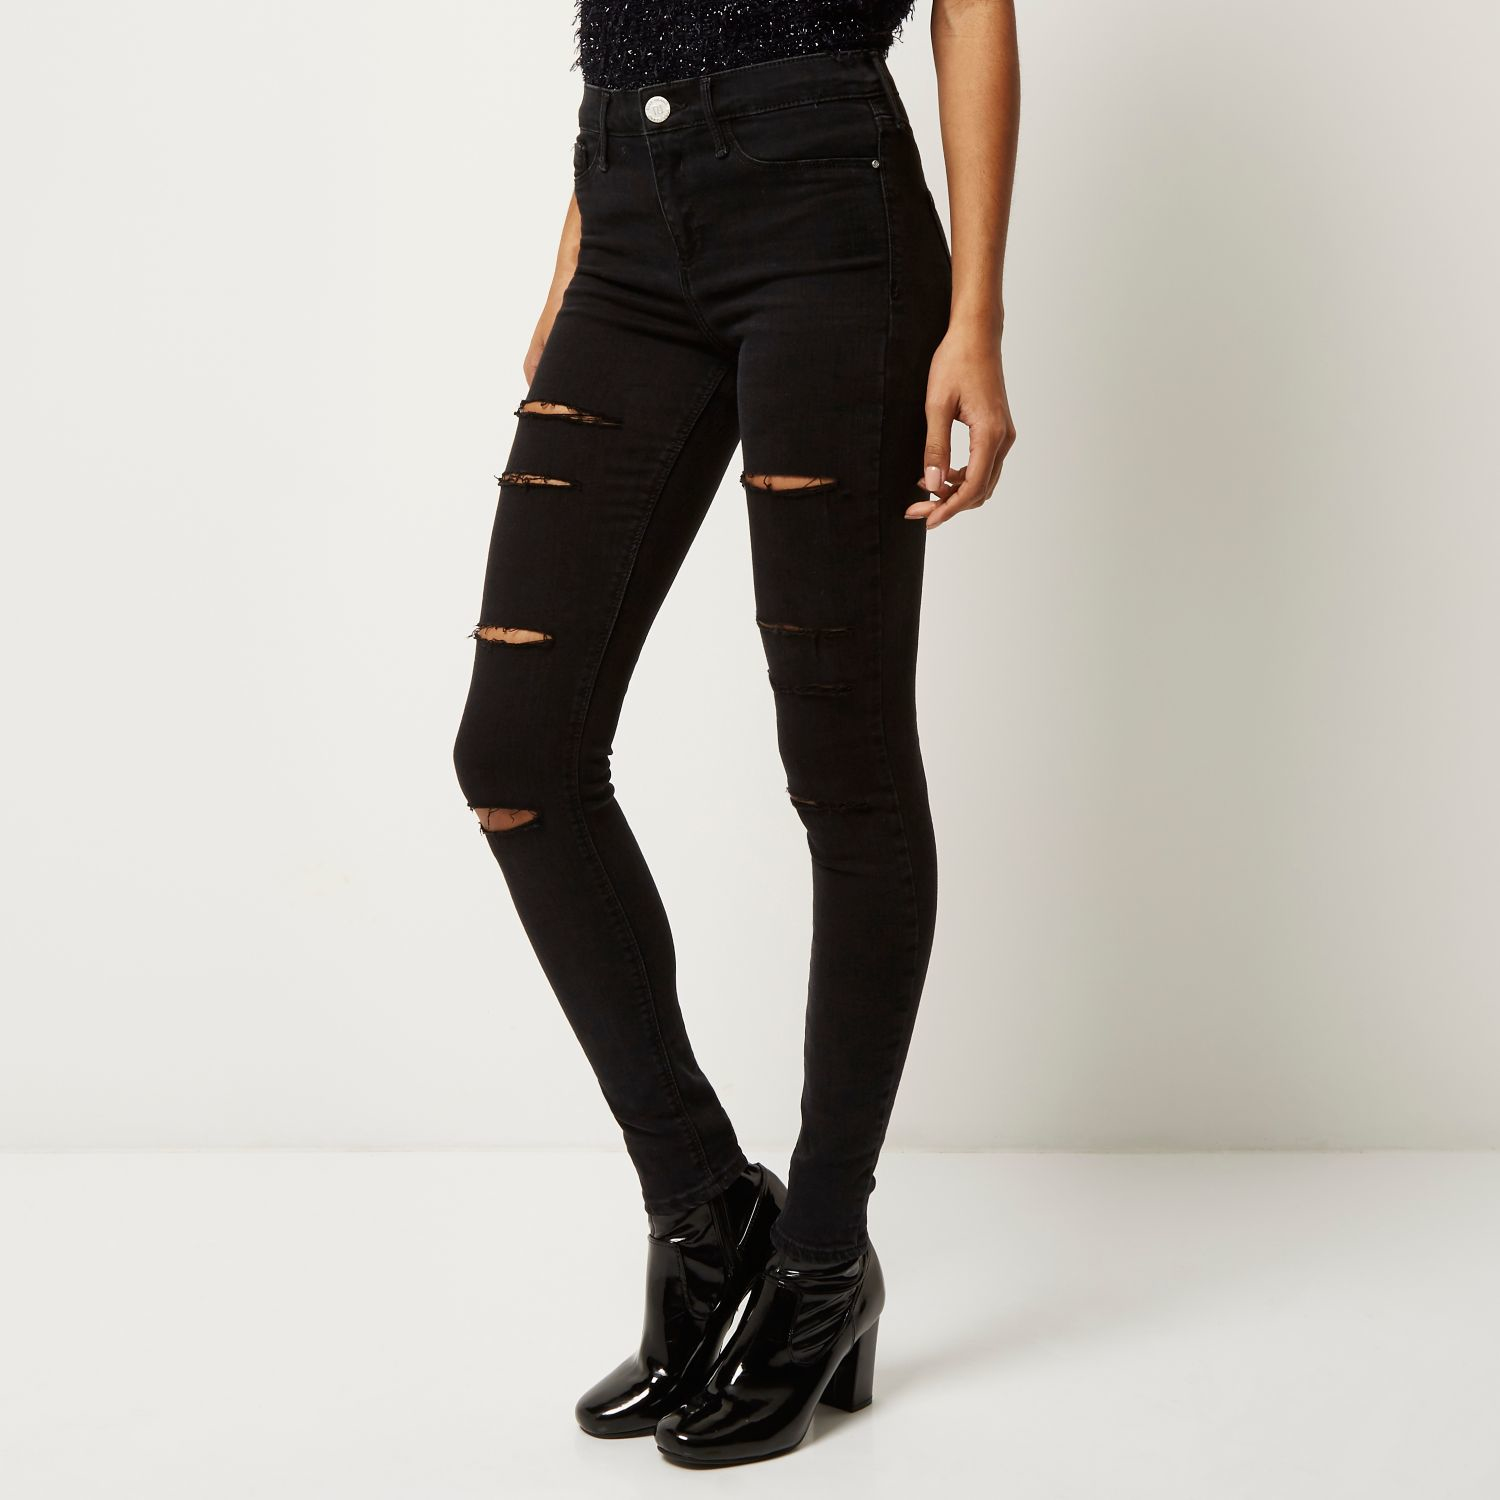 River Island Black Ripped Molly Jeggings in Black - Lyst